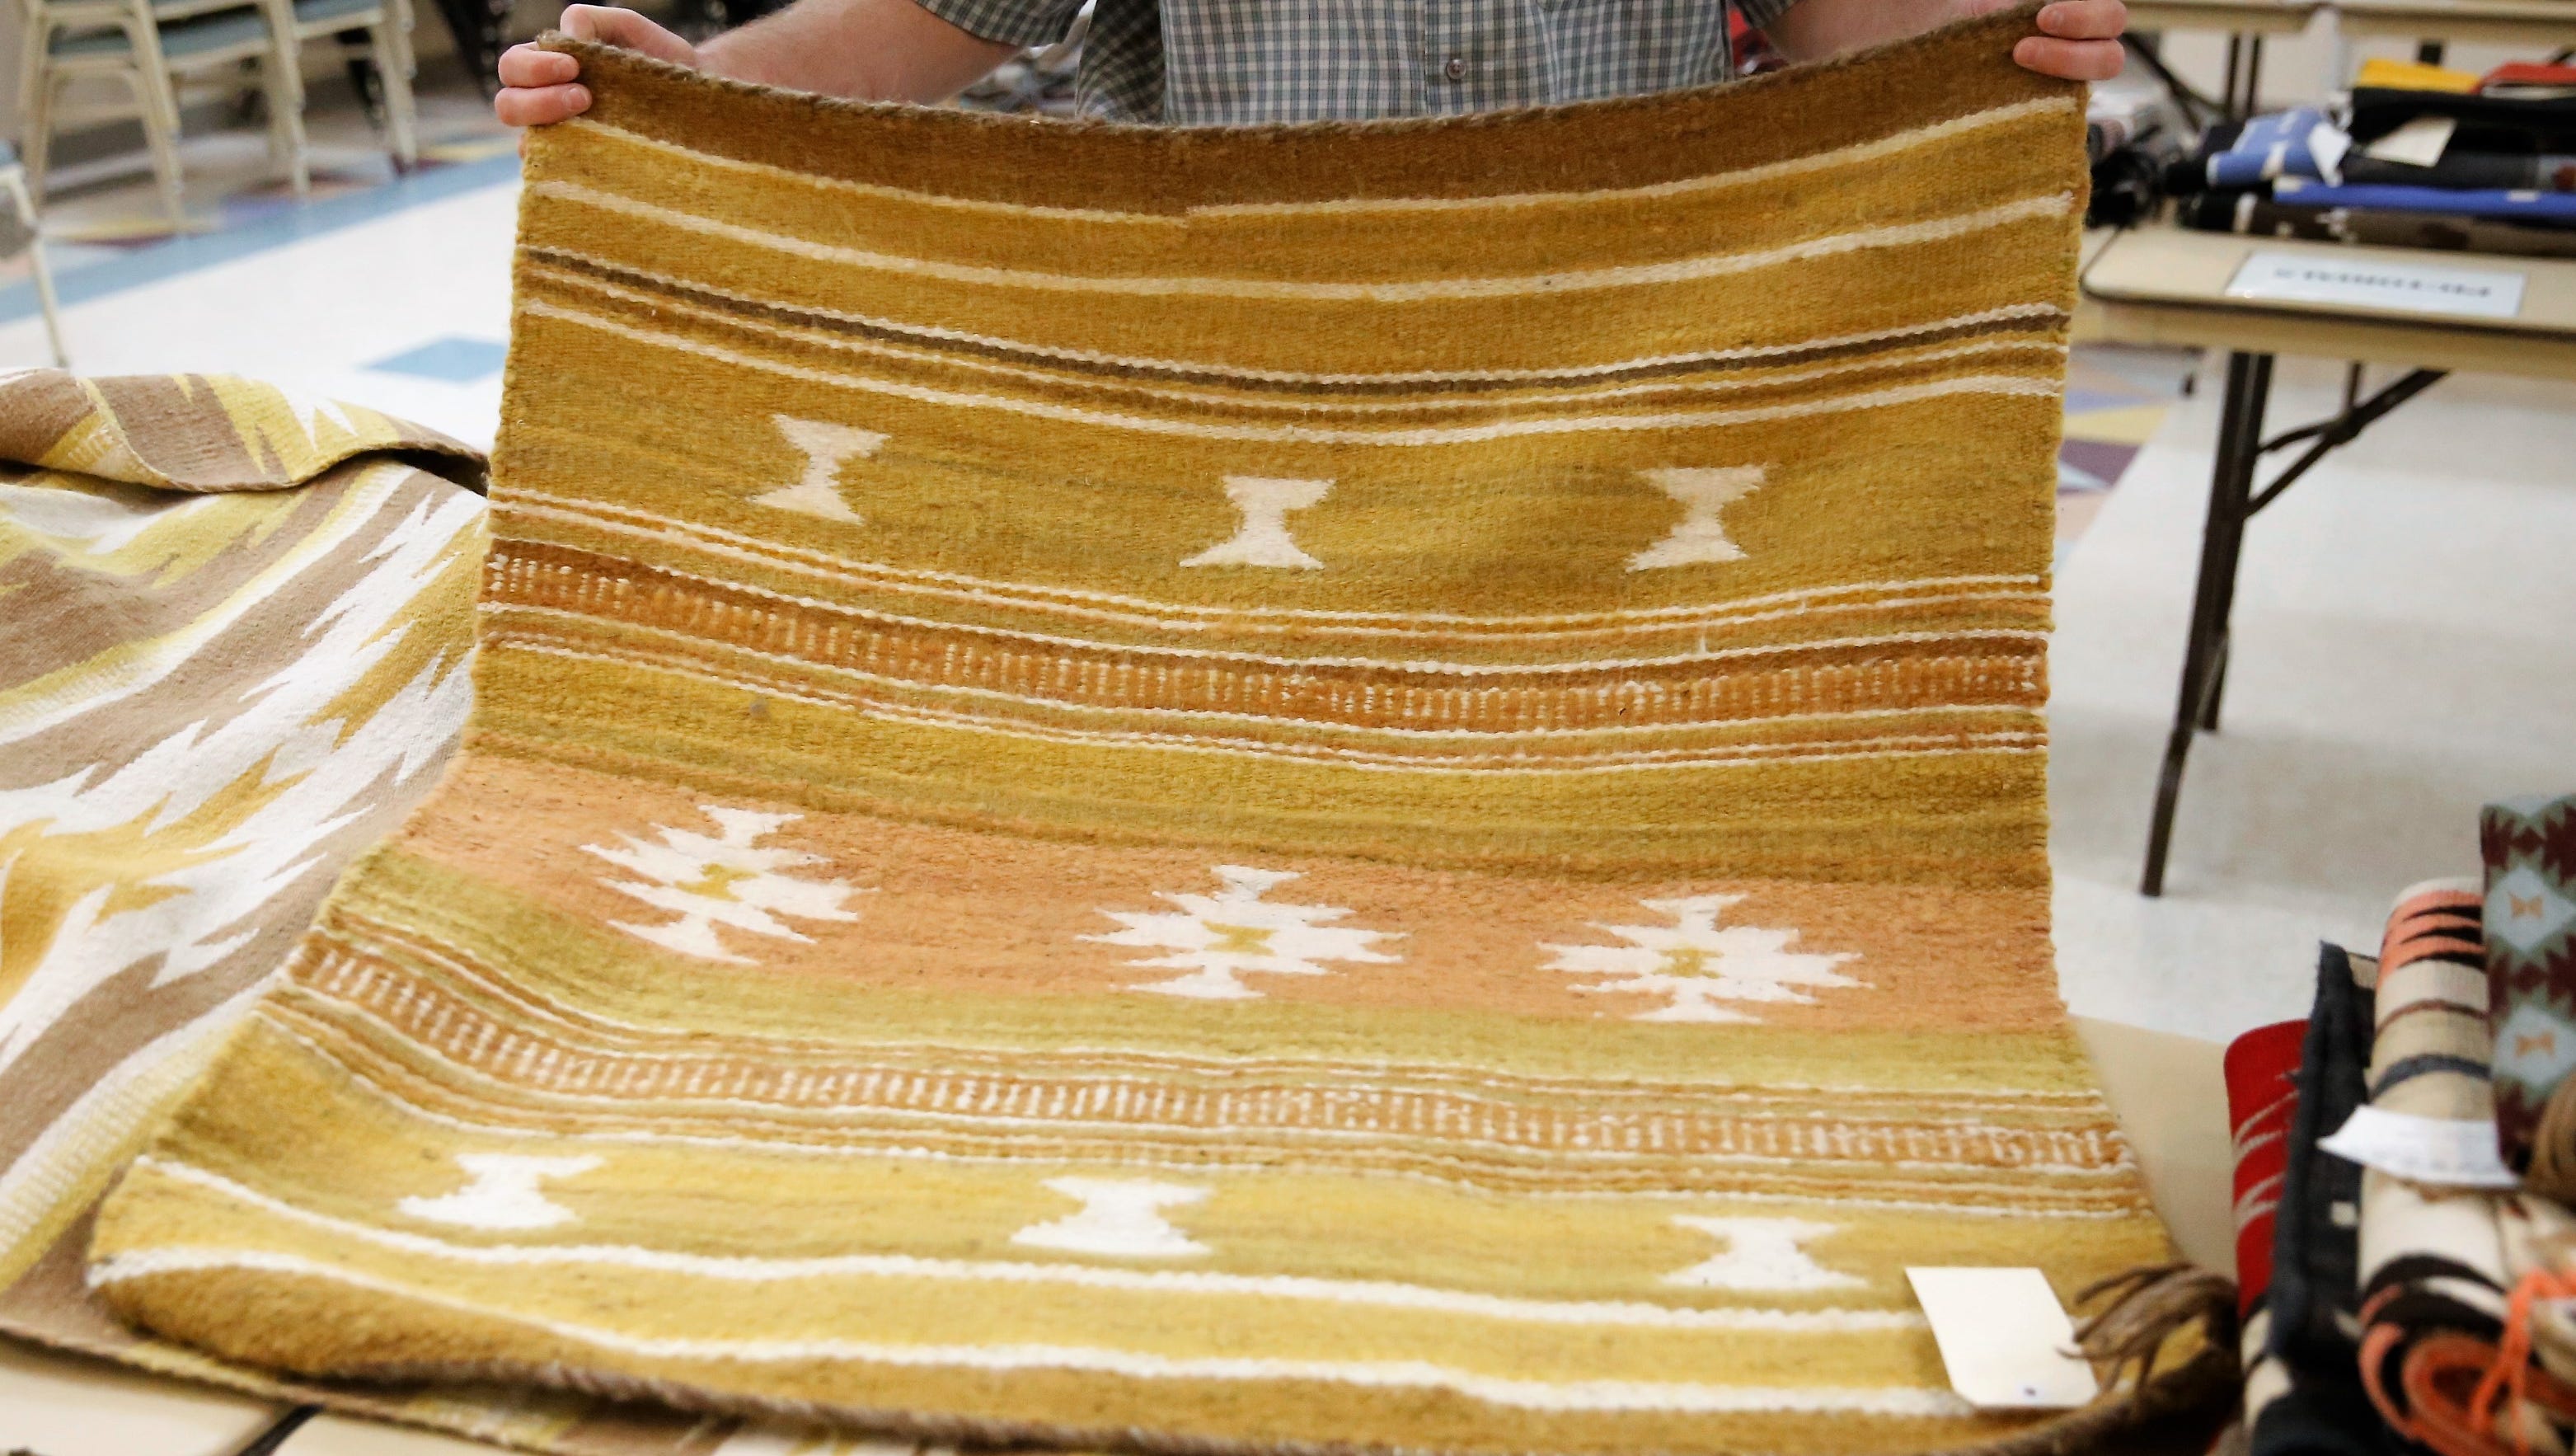 This weaving from the Crystal Trading Post is one of approximately 200 that will be offered for sale during Saturday's annual Navajo Benefit Rug Auction at the Farmington Museum at Gateway Park.